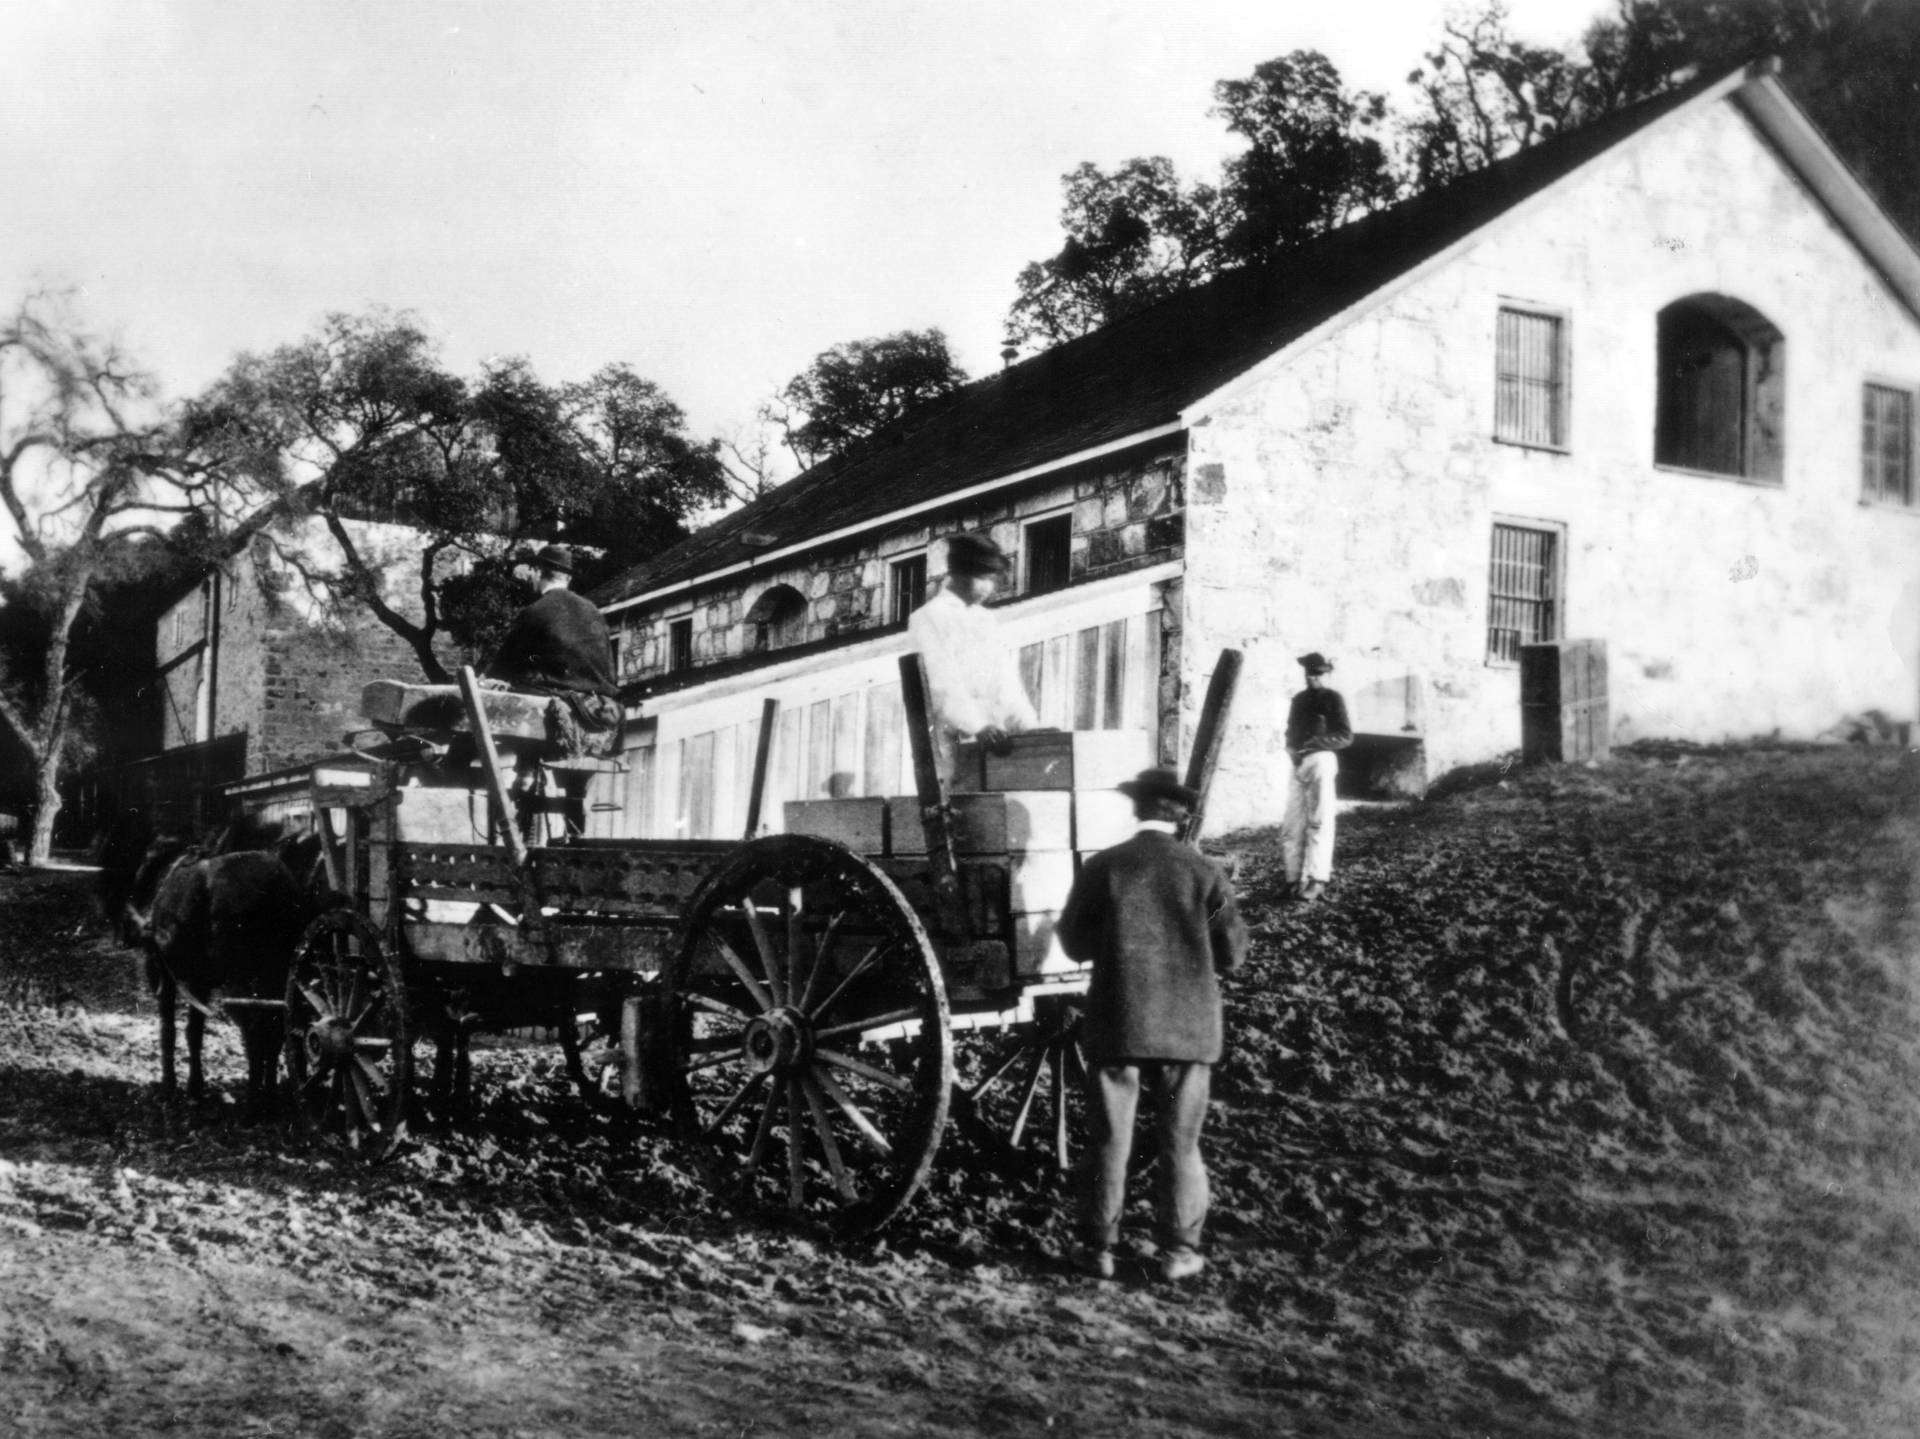 Chinese workers transport wine at Buena Vista, the oldest winery in California's Sonoma County, built in the mid-1800s. From the backbreaking labor of clearing roads and digging out caves to highly skilled horticultural work, Chinese laborers helped build Sonoma's wine country.